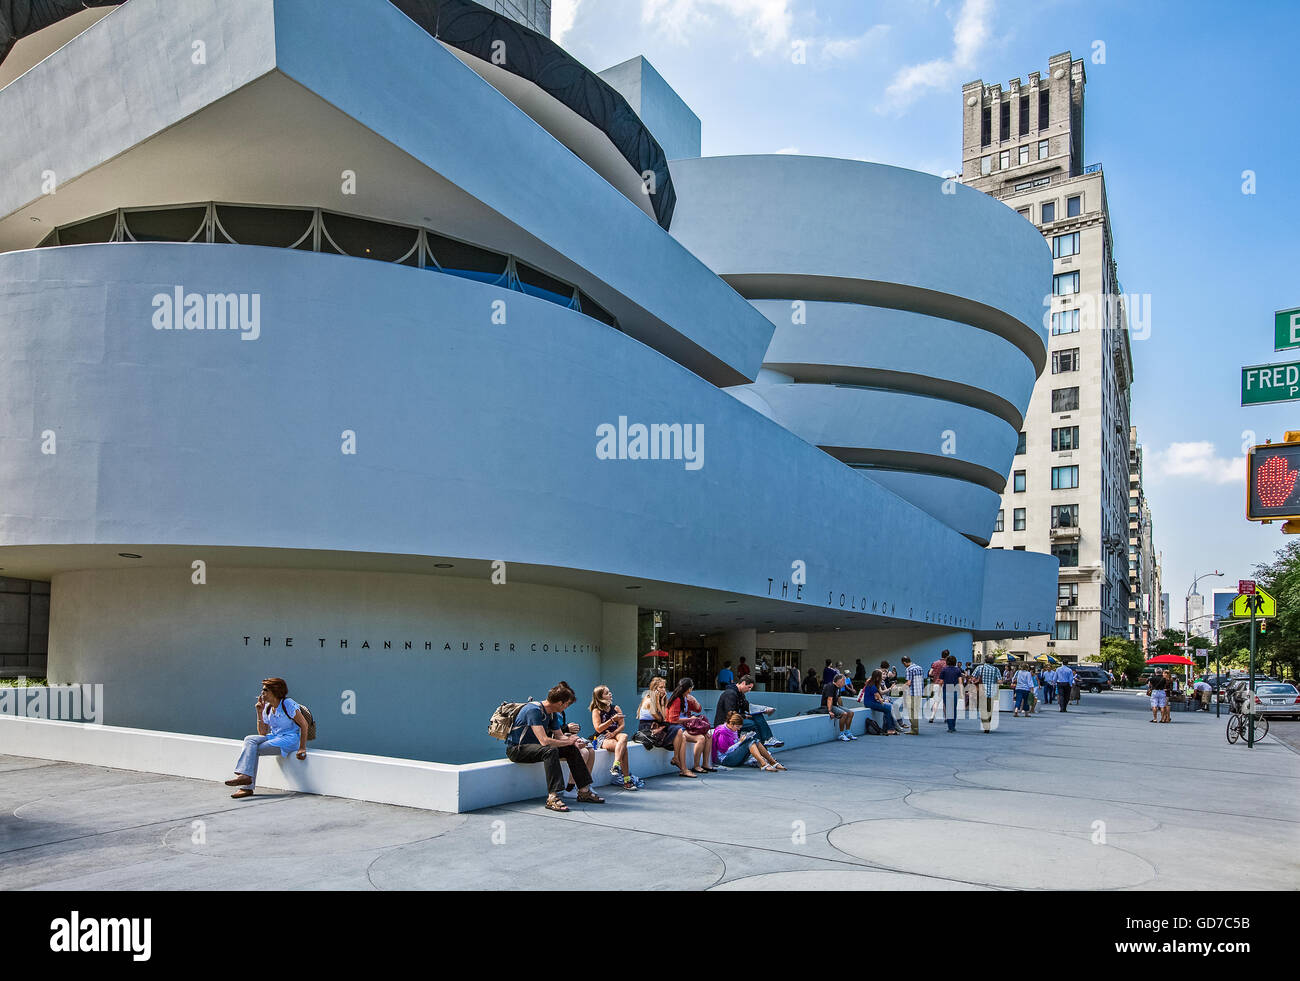 U.S.A., New York,Manhattan,people waiting for the entrance at the Guggenheim museum Stock Photo